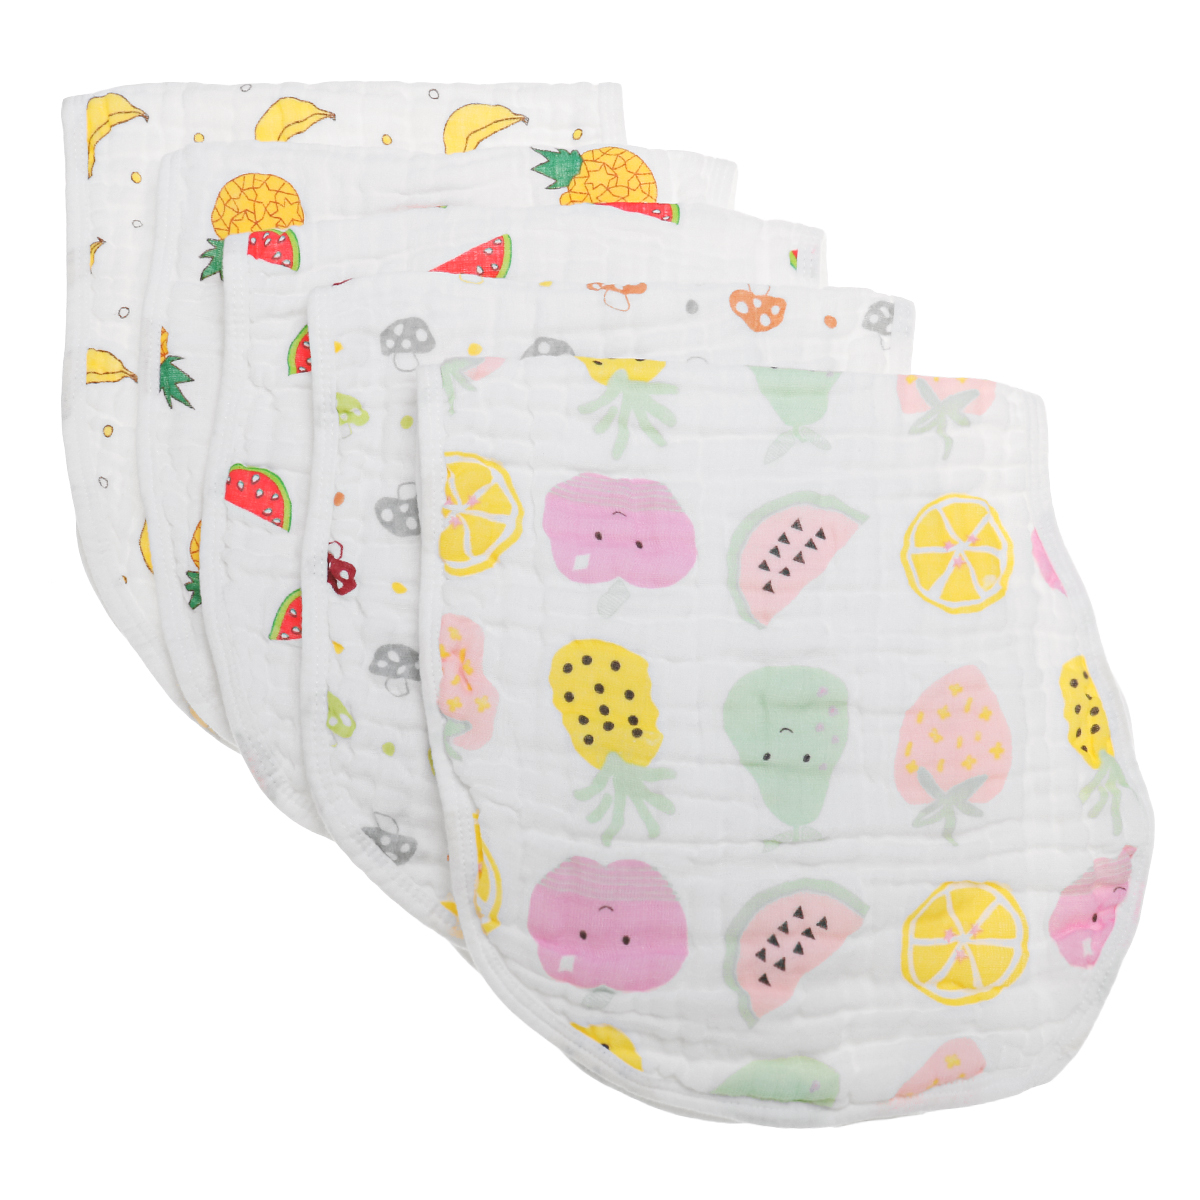 Baby girl burp cloth Set of 3 Baby shower gifts for a girl Muslin burp cloth Burping cloth girl Breastfeeding cloth diaper Baby accessories